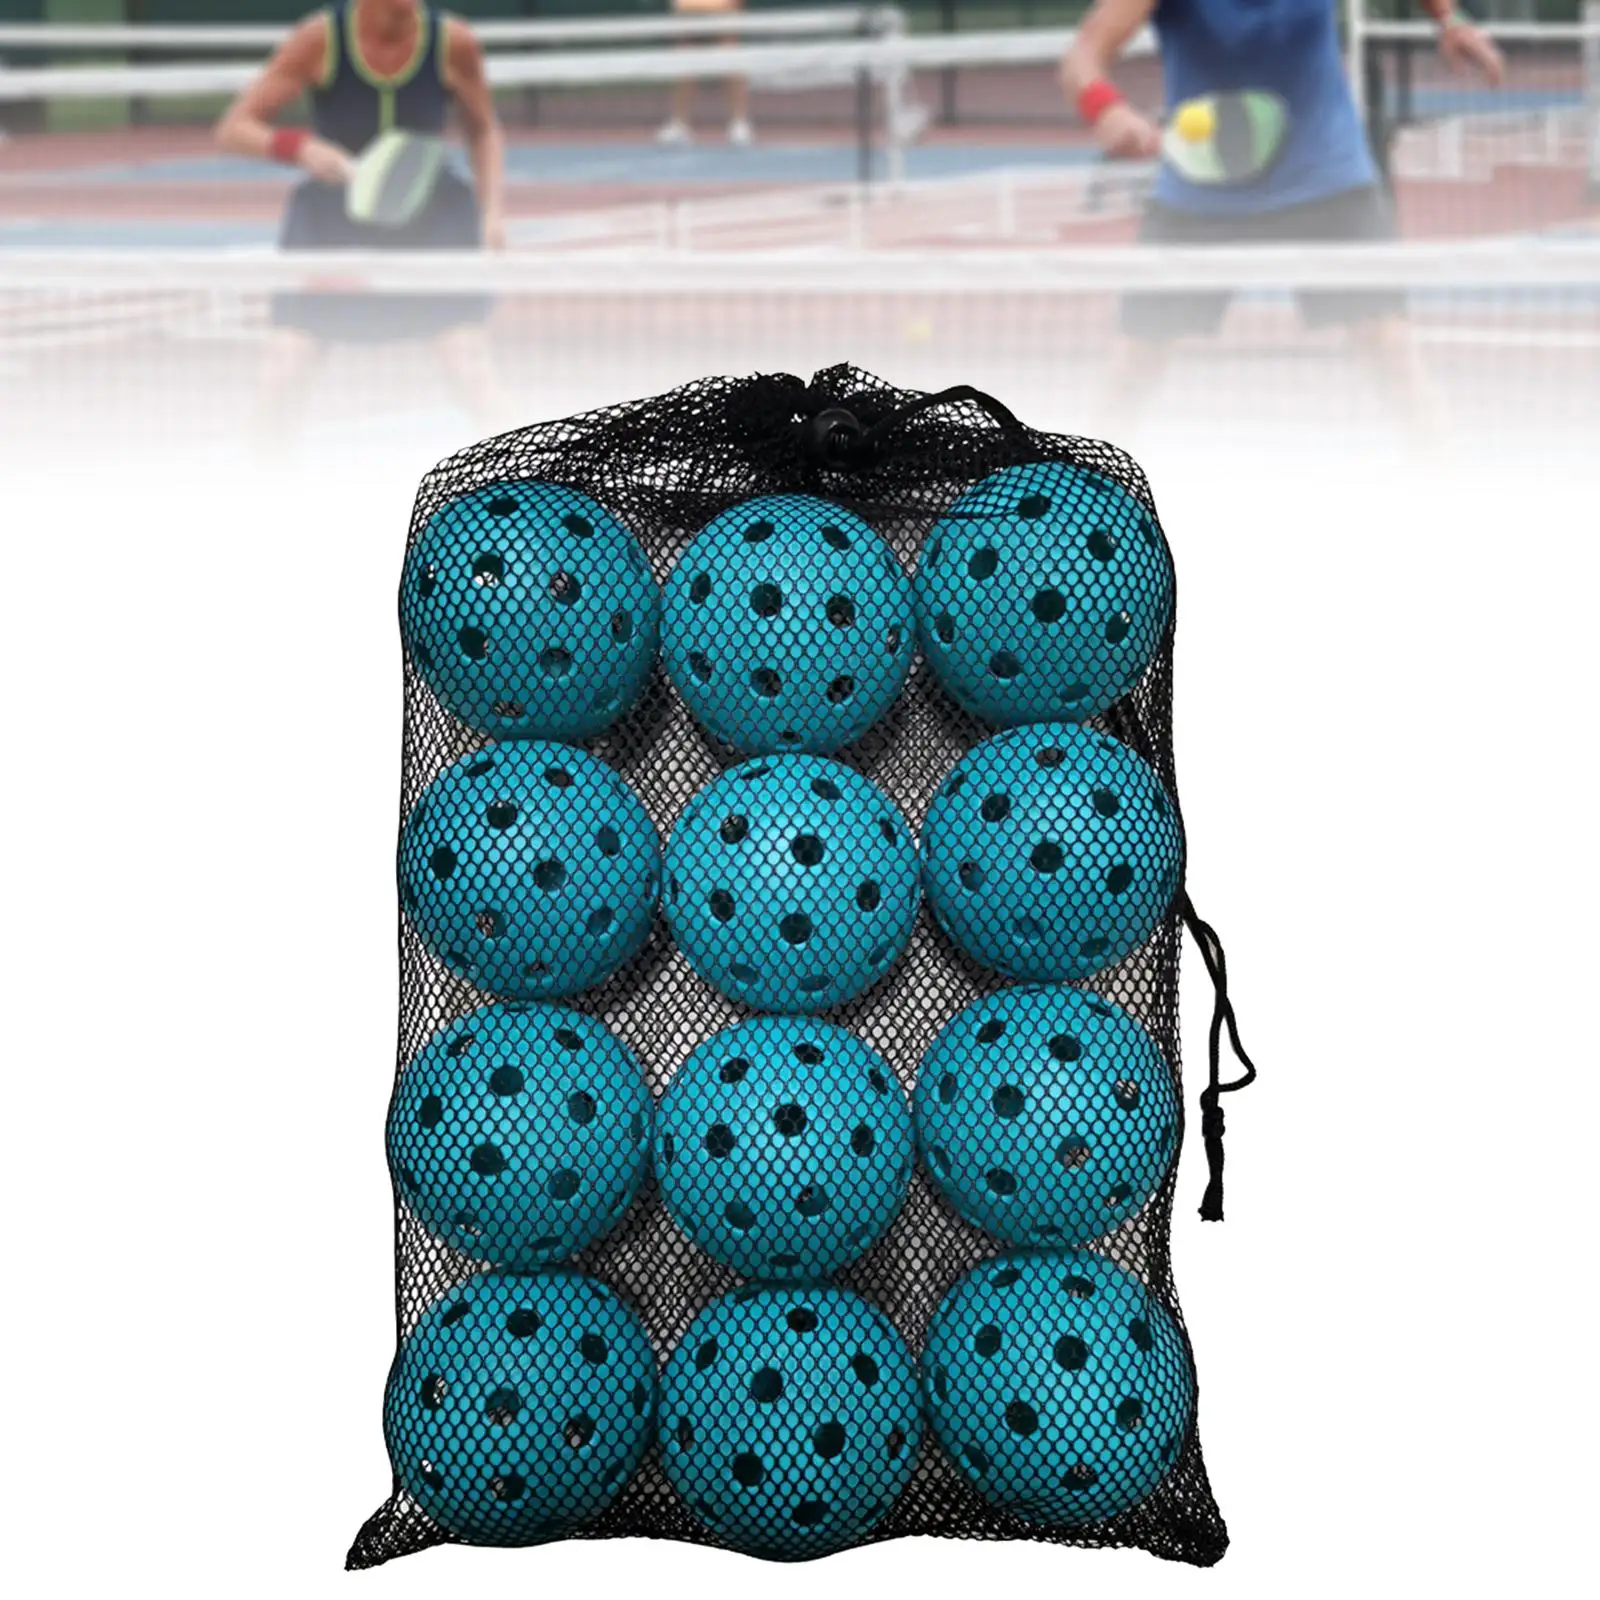 12 Pieces Pickleball Balls Pickle Ball Devices for Outdoor Tournament Play